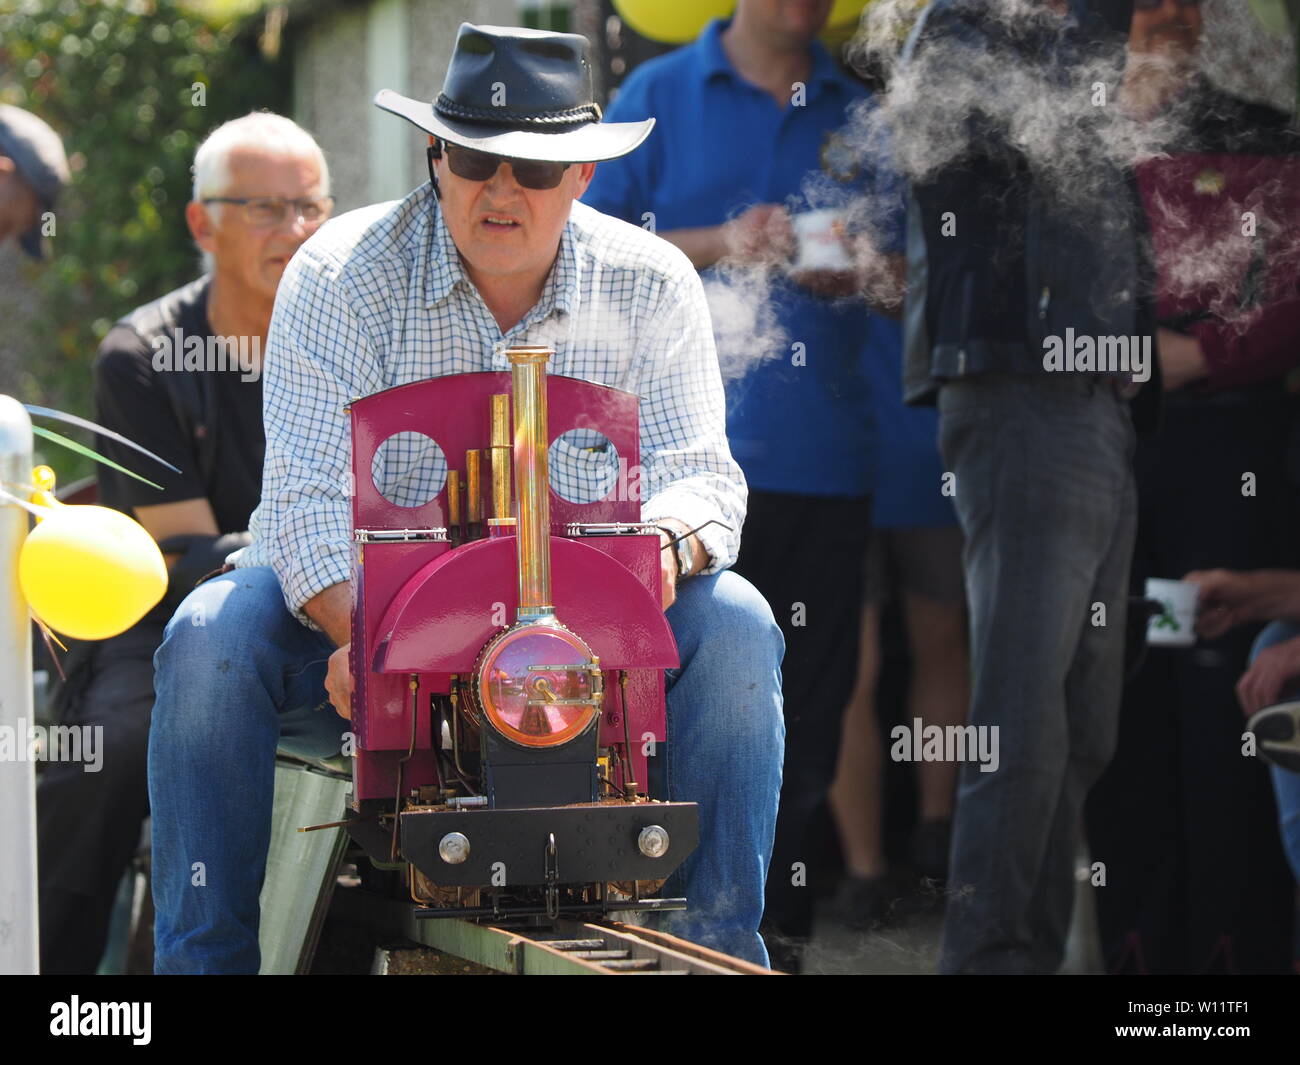 Sheerness, Kent, UK. 29th June, 2019. Sheppey Takeover Sci-fi event: a sci-fi event organised by Sheppey Model Engineering Club featuring cosplay, miniature steam train rides & stalls at Barton's Point in Sheerness, Kent. Credit: James Bell/Alamy Live News Stock Photo